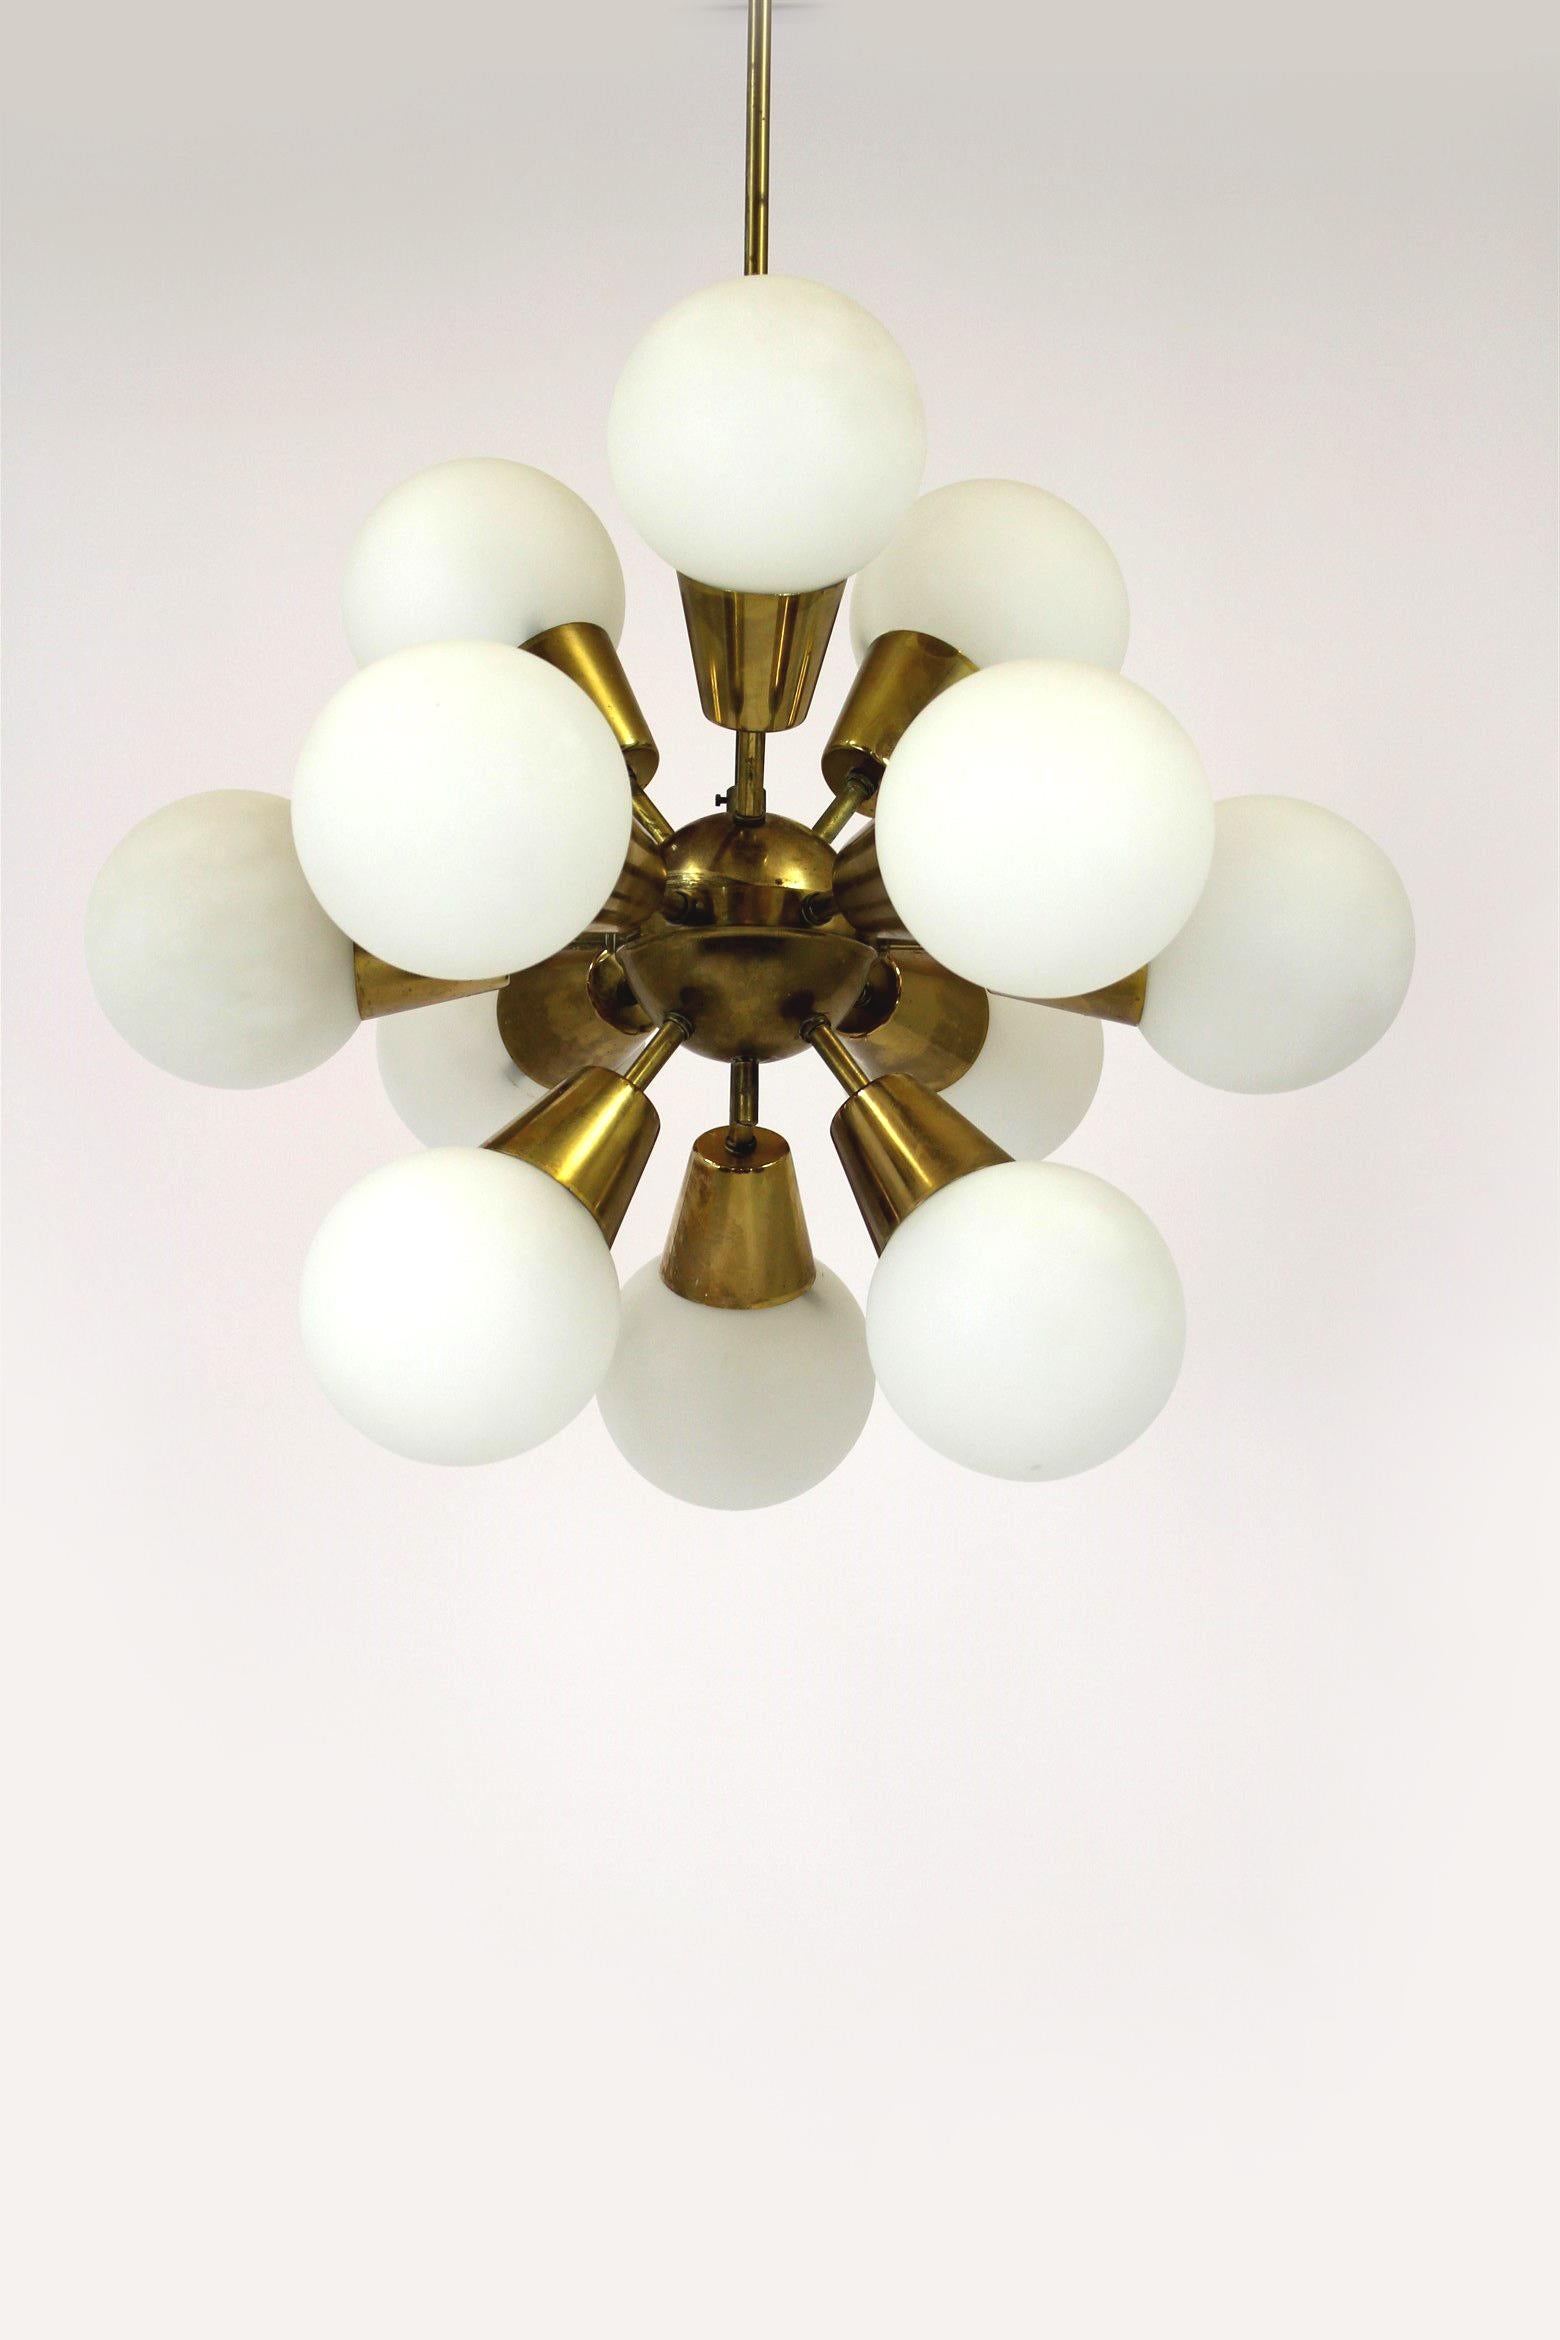 Mid-Century Sputnik chandelier. Made in former Czechoslovakia by Kamenický Šenov in the 1970s. Made of brass and milk glass, features 12 x E14 light fittings.